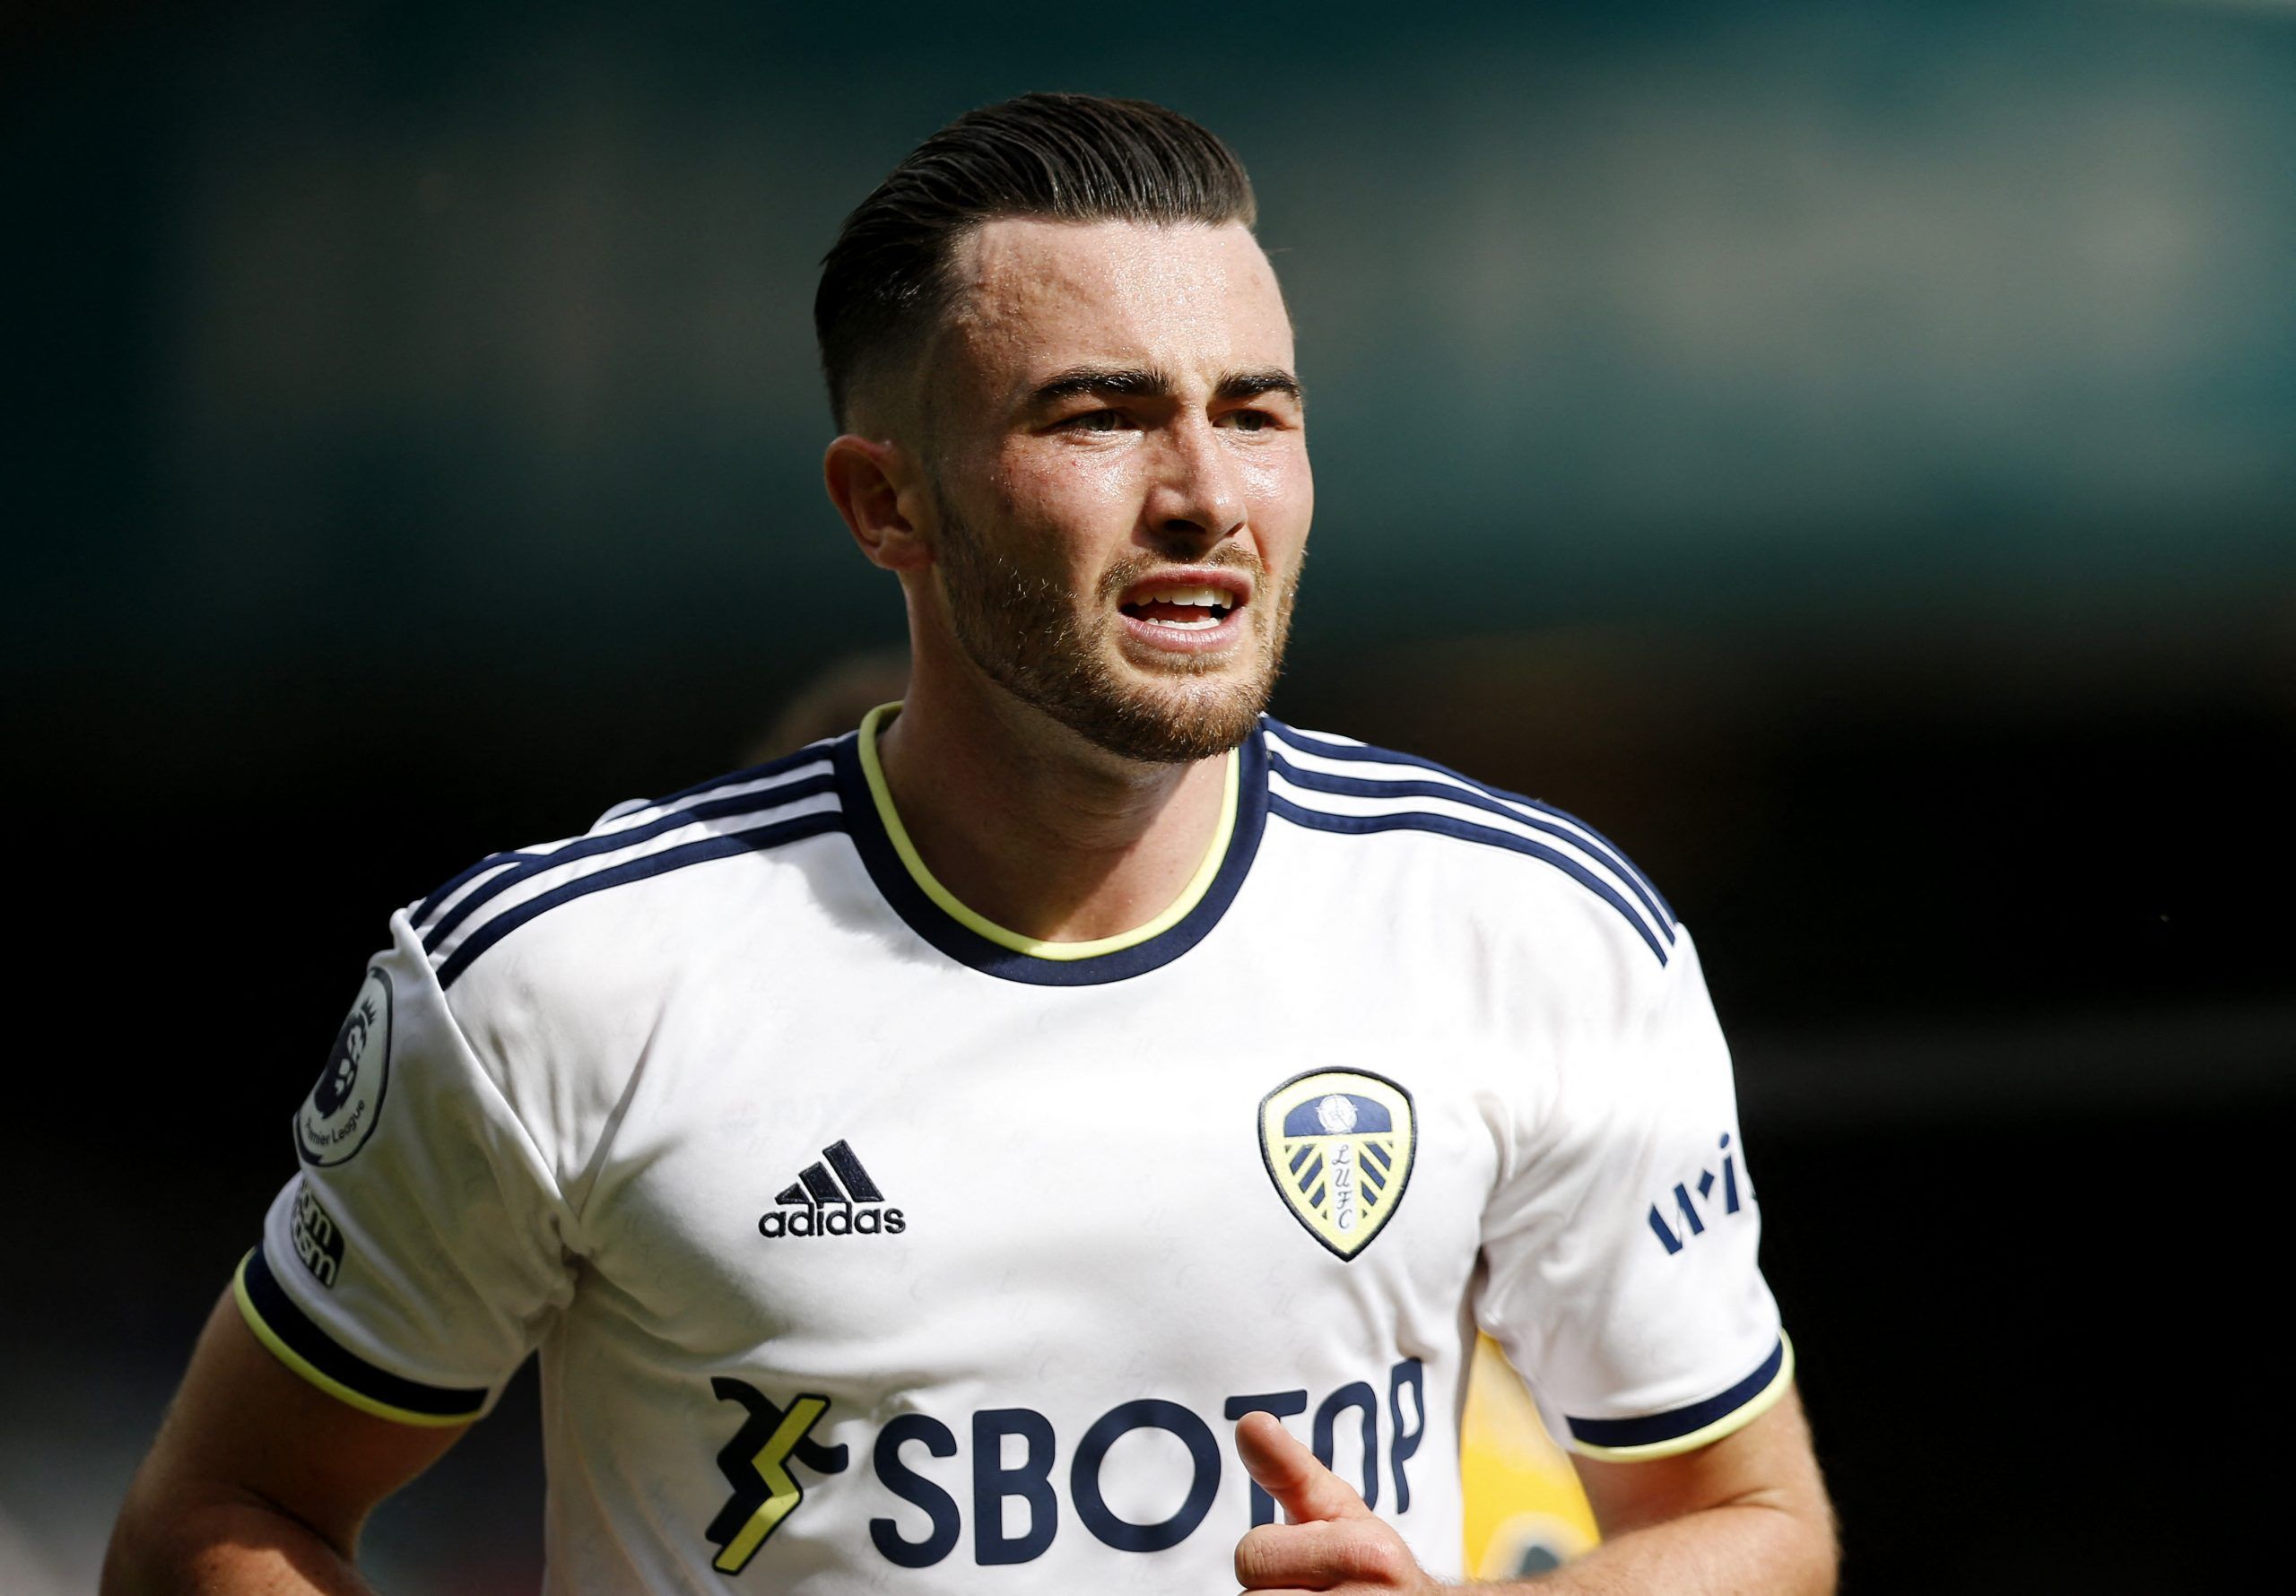 Leeds: Club have ‘no choice’ but to stump up huge Jack Harrison deal -Follow up